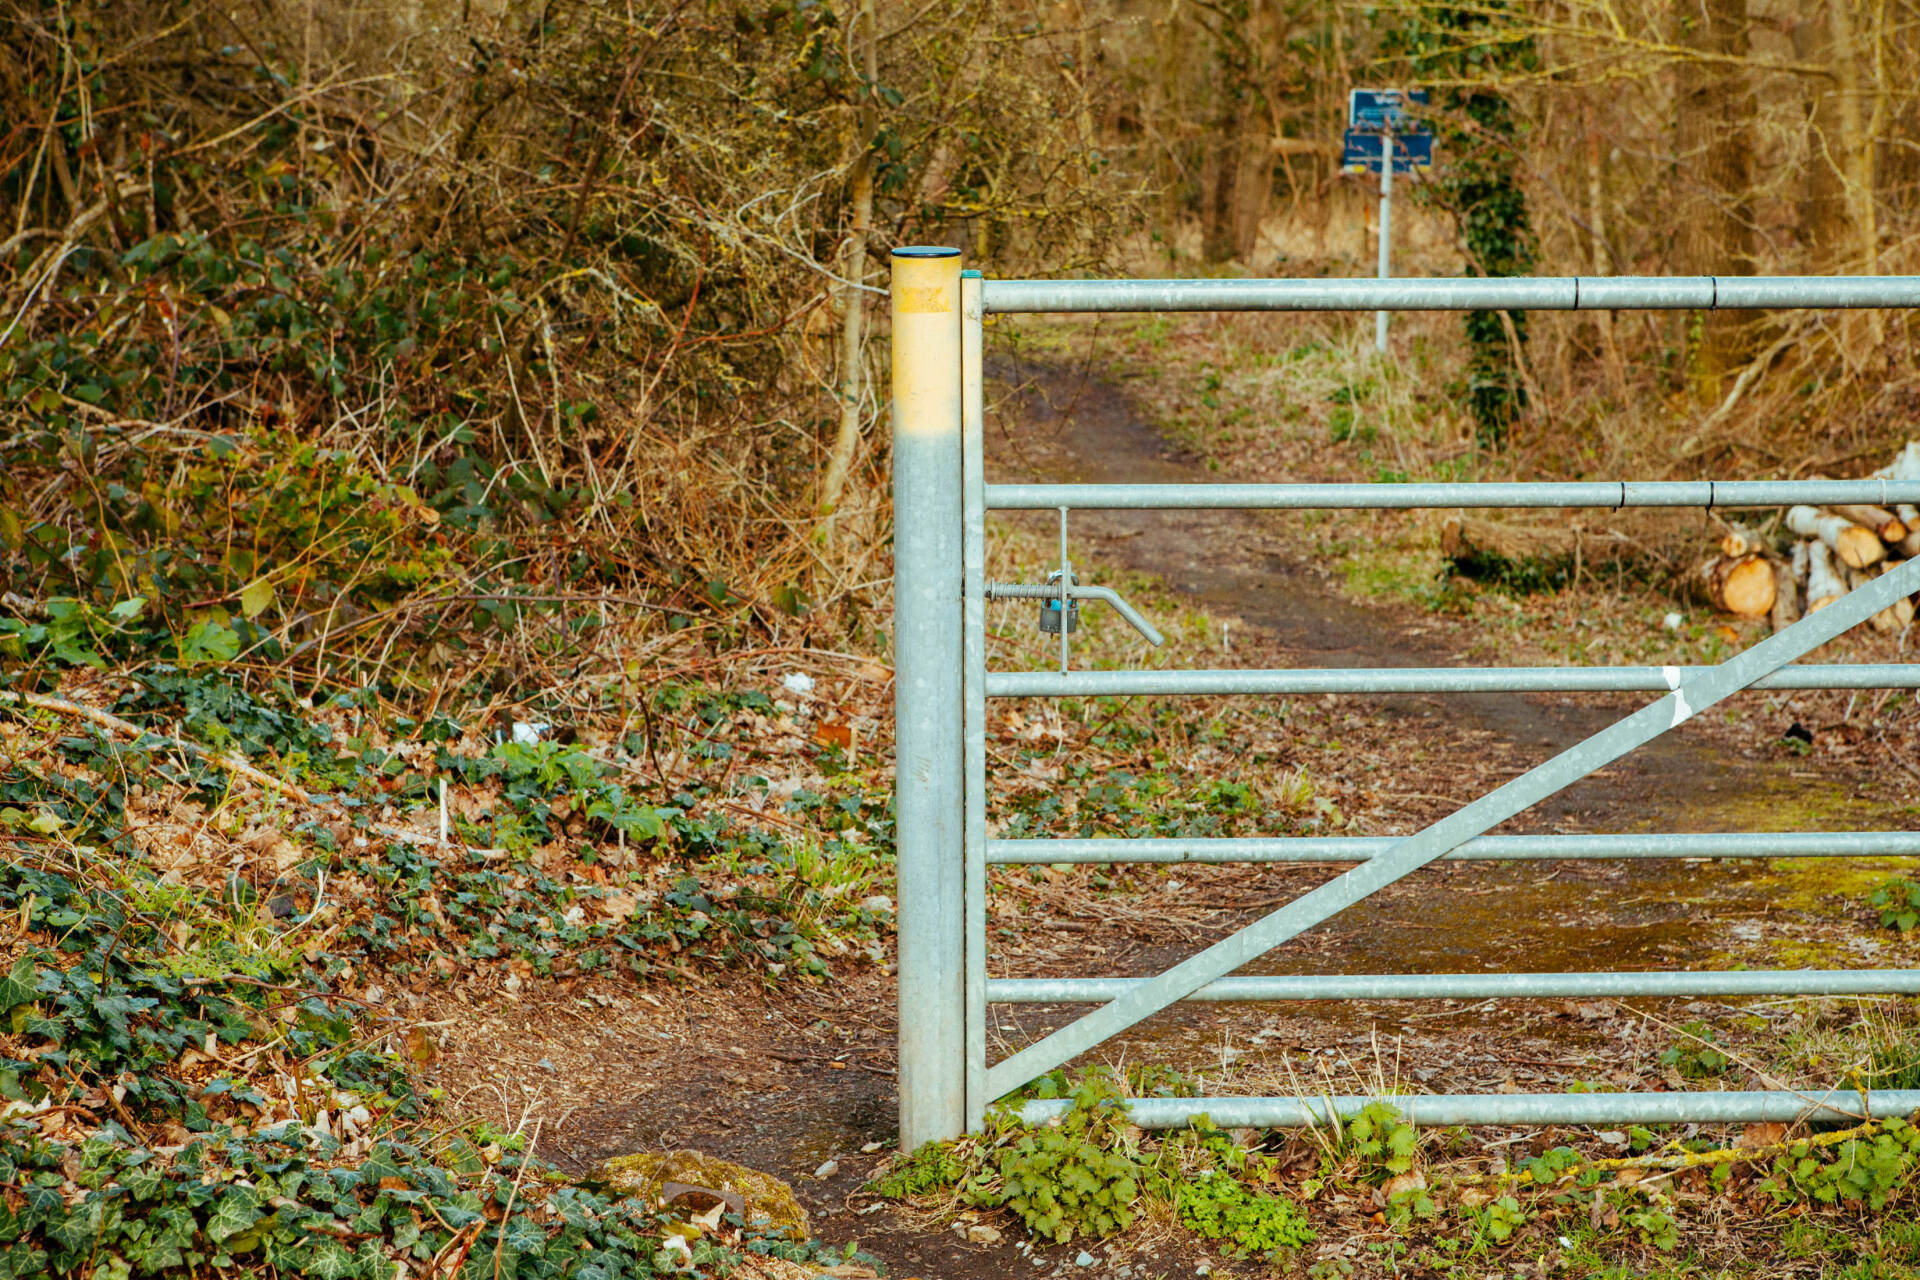 A woodland path and metal gate, with a sign in the background on the right.